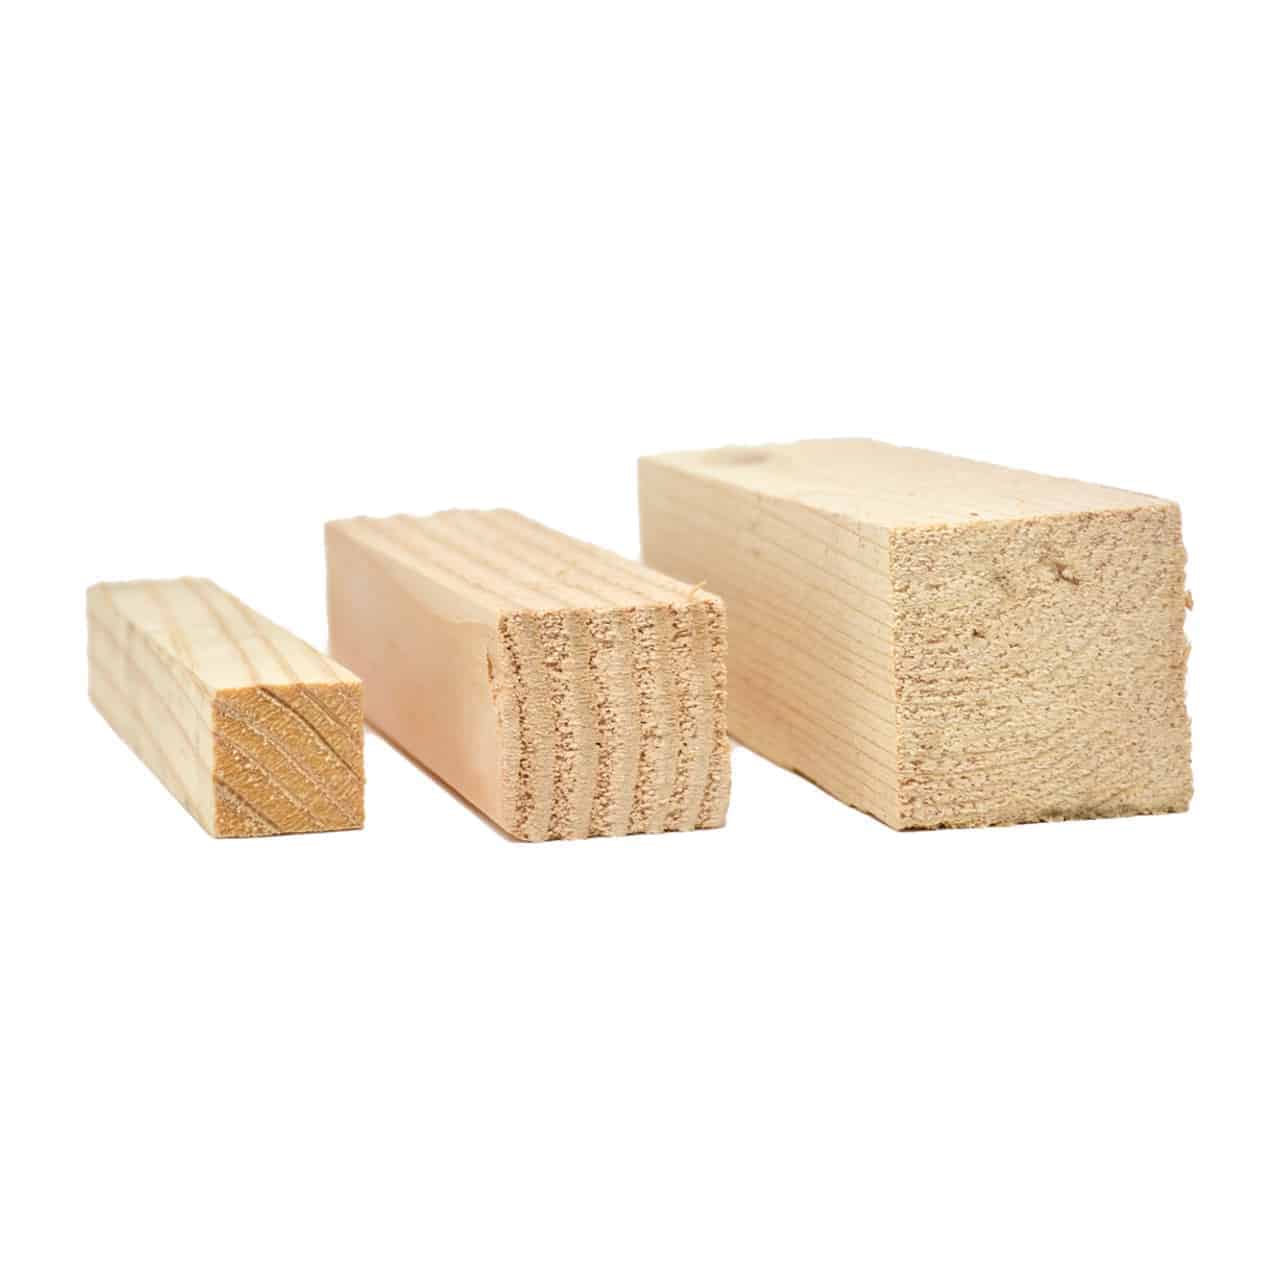 Wood Block Pipe Supports by Buckaroos, Inc.